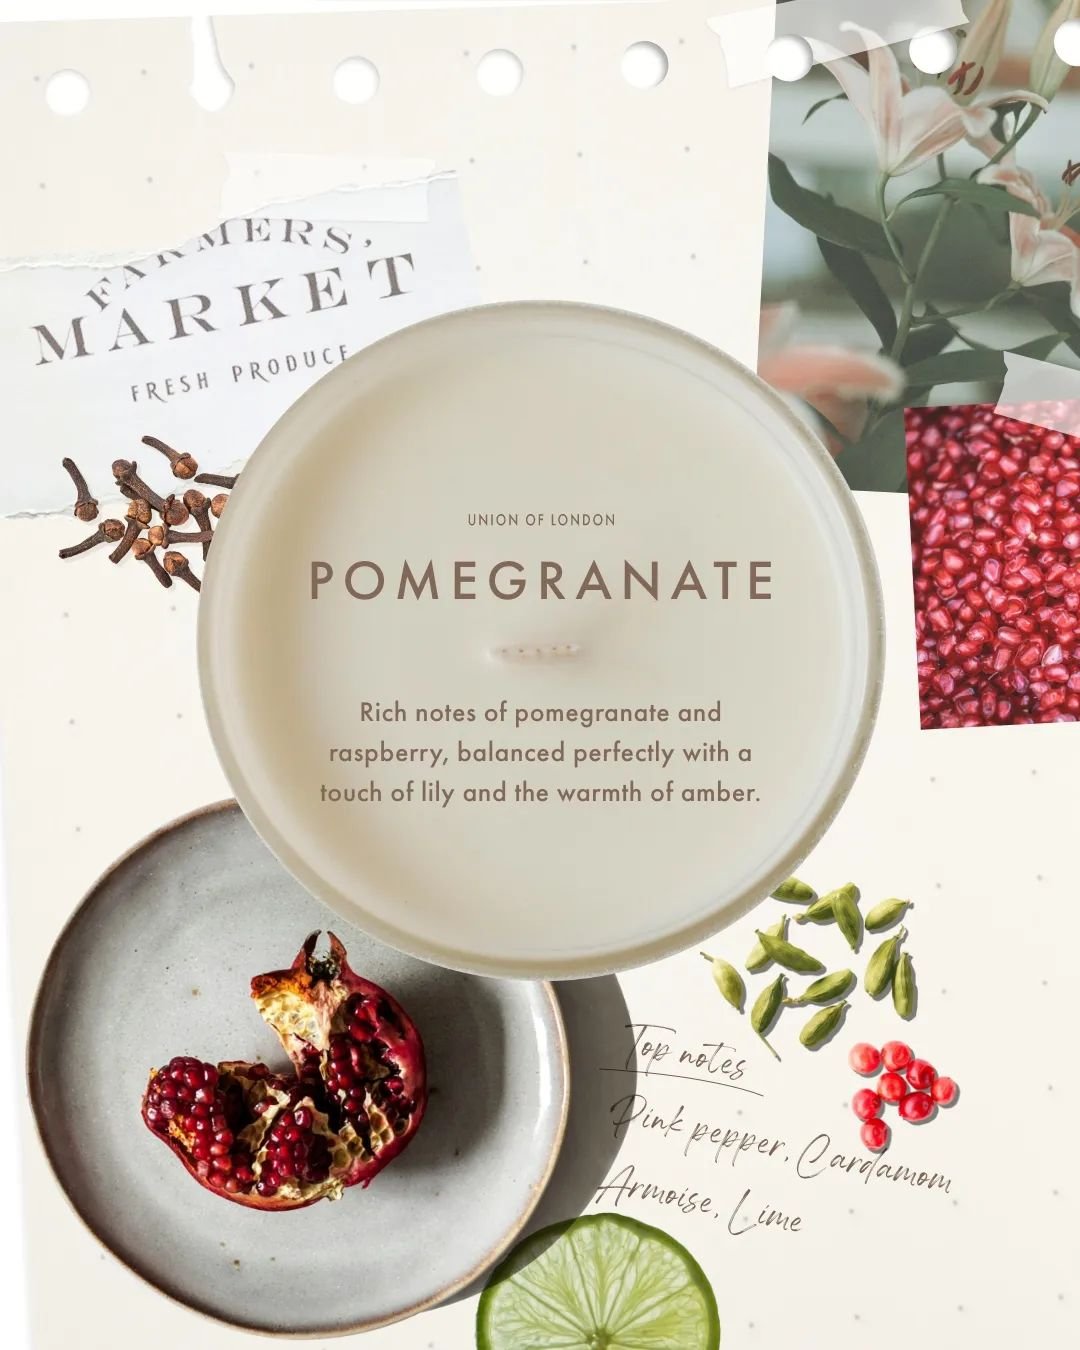 From our nose to your table... Our chief 'nose', Mark has quite the knack for creating complex and layered scents that develop and evolve. Take Pomegranate for example, a fragrance more nuanced than the name might suggest, with over 10 ingredients in